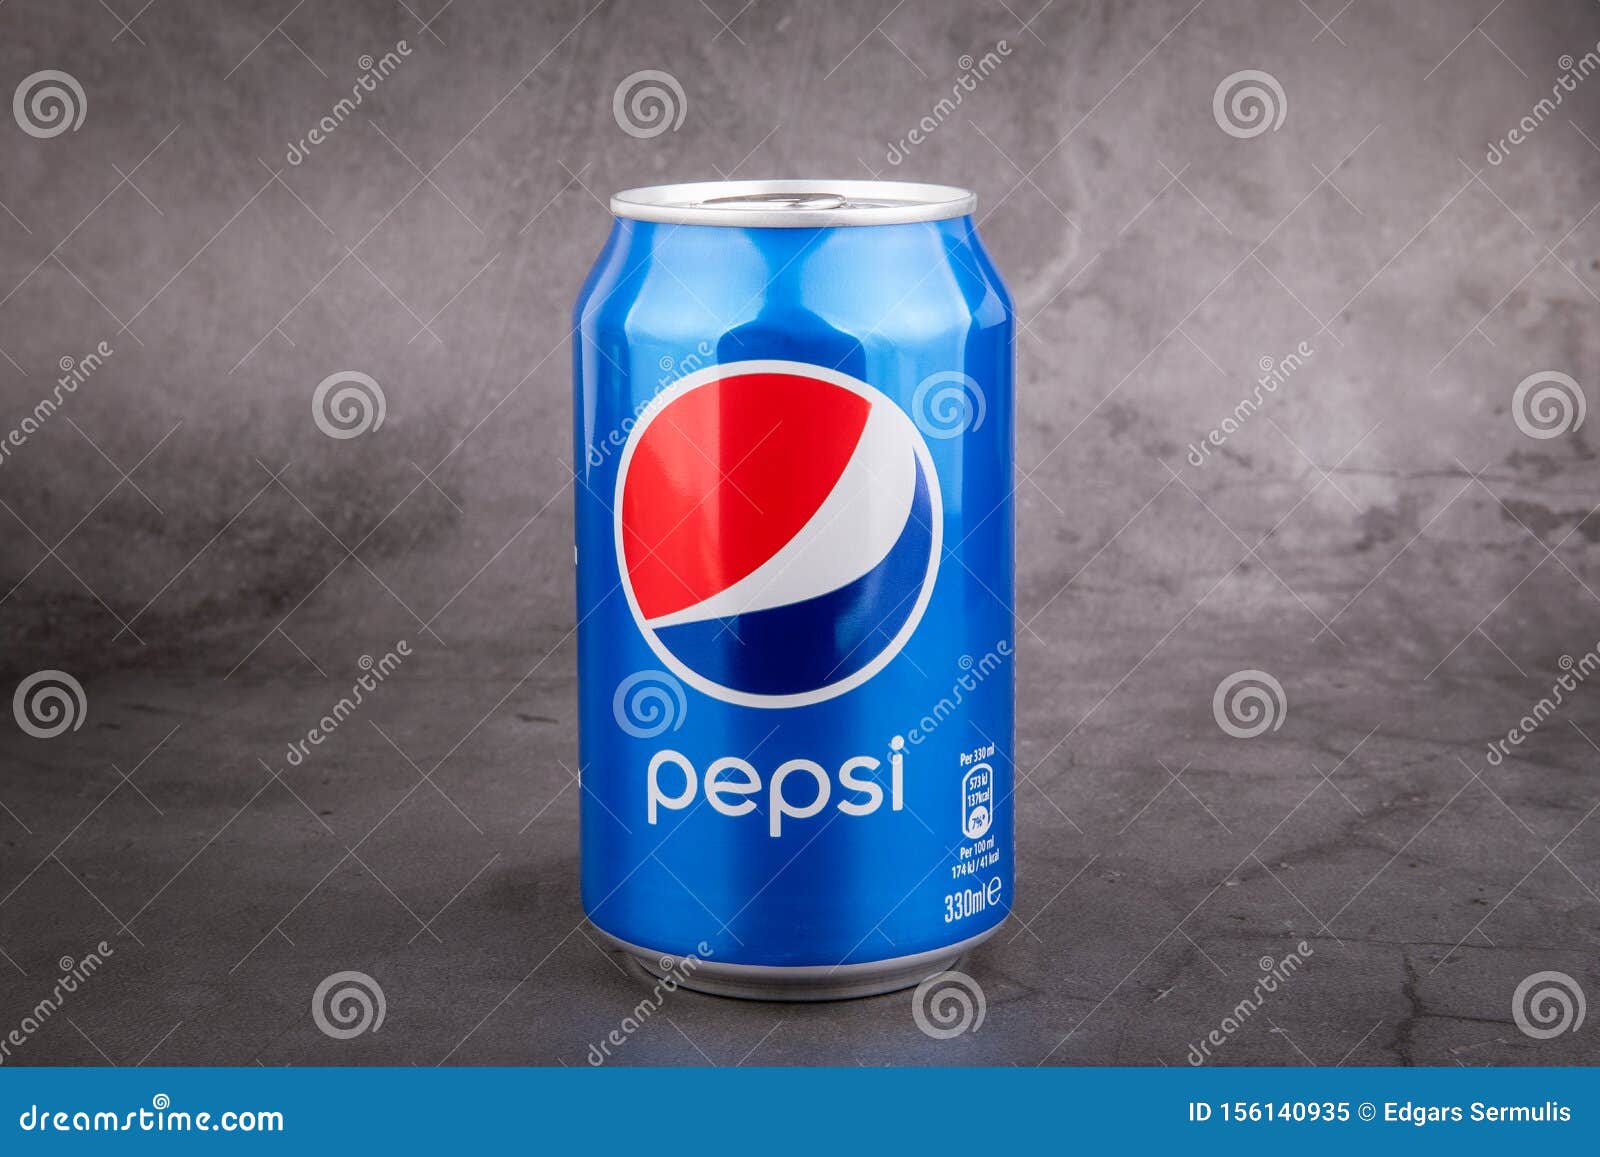 Pepsi Can on Dark Background. Pepsi is a Carbonated Soft Drink Produced ...